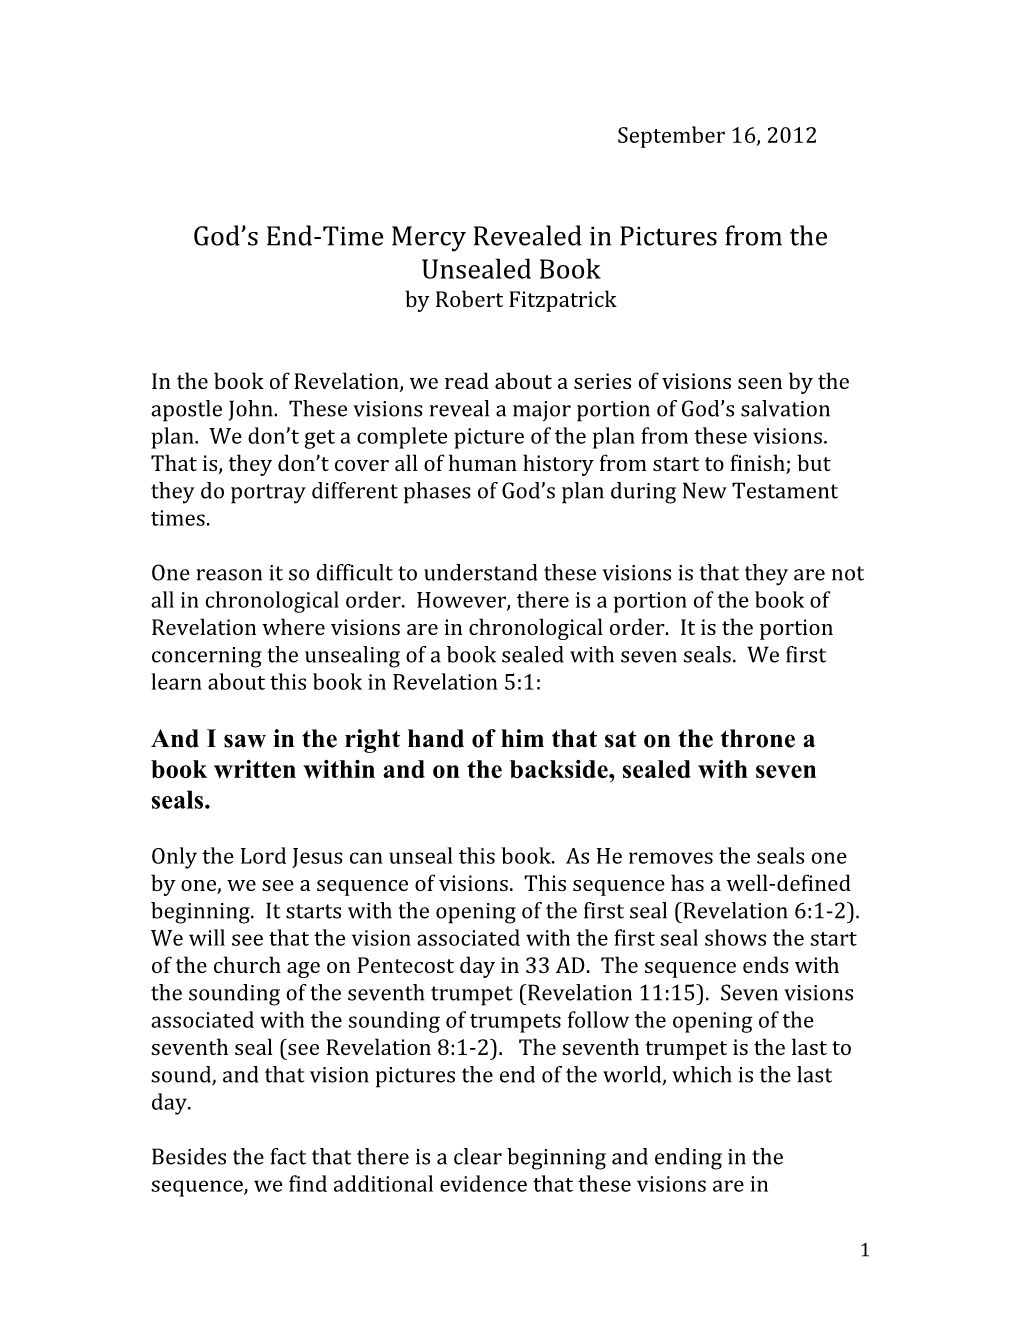 God S End-Time Mercy Revealed in Pictures from the Unsealed Book